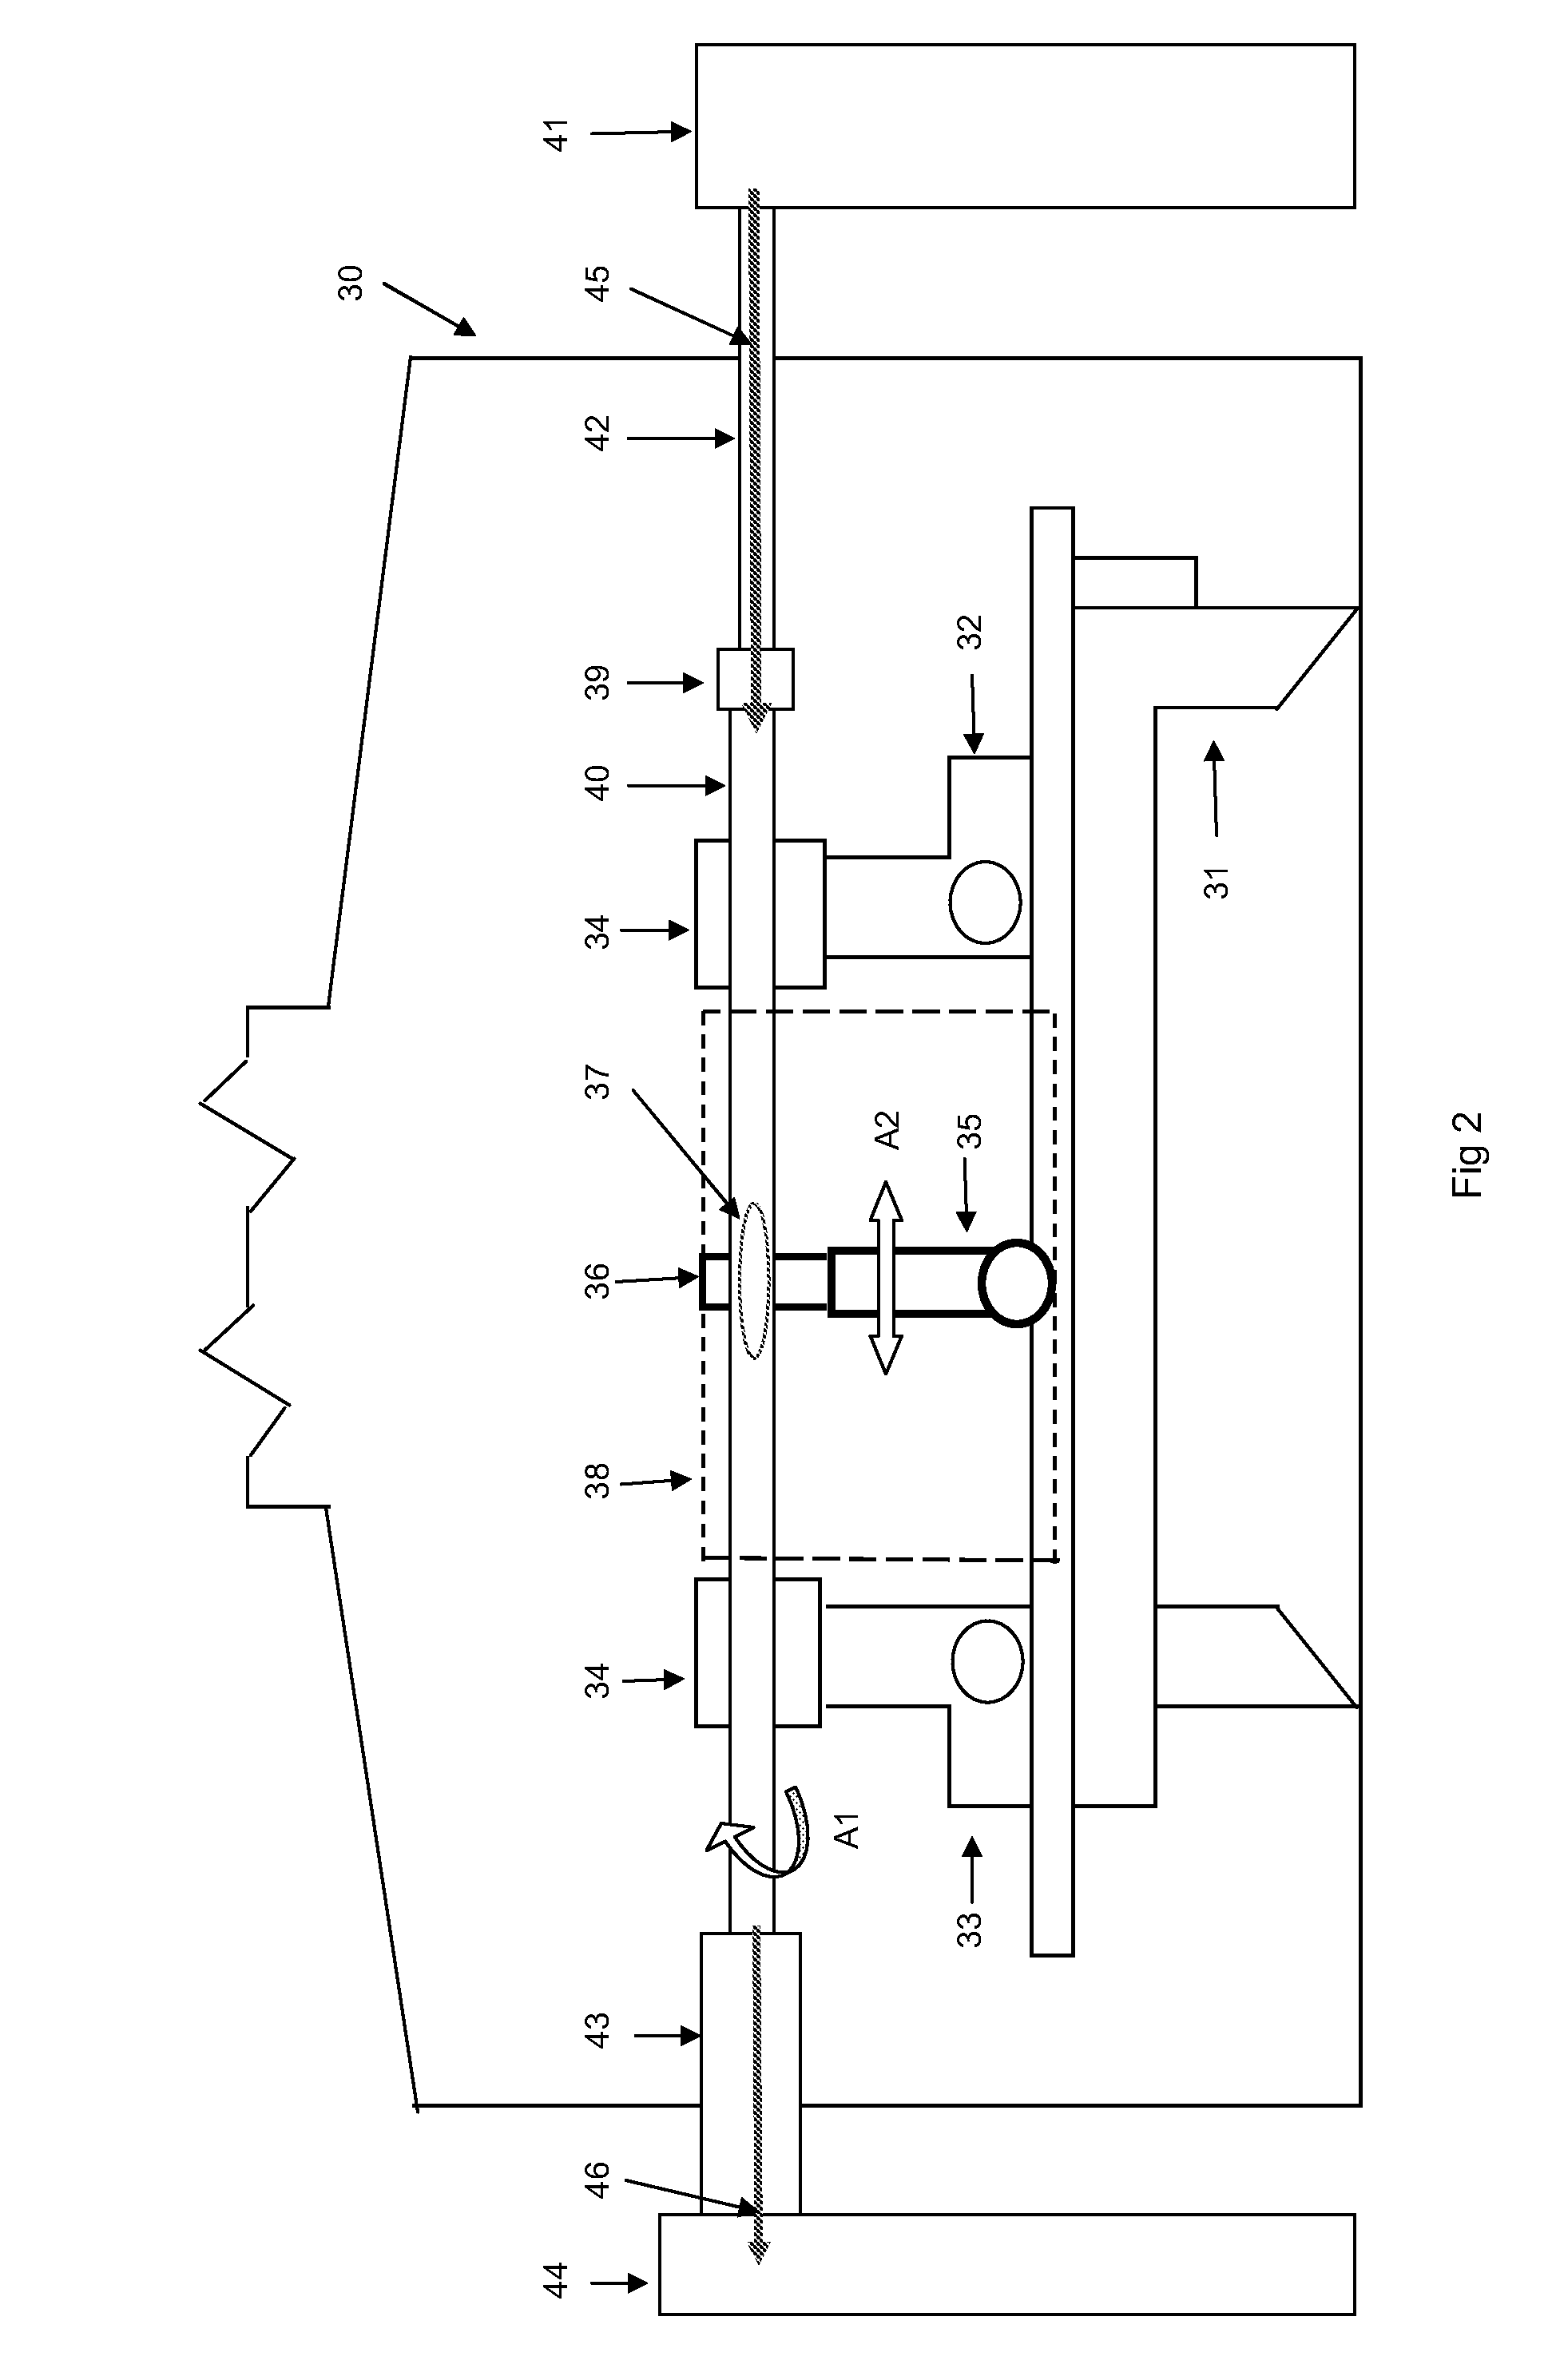 Process, apparatus, and material for making silicon germanium core fiber